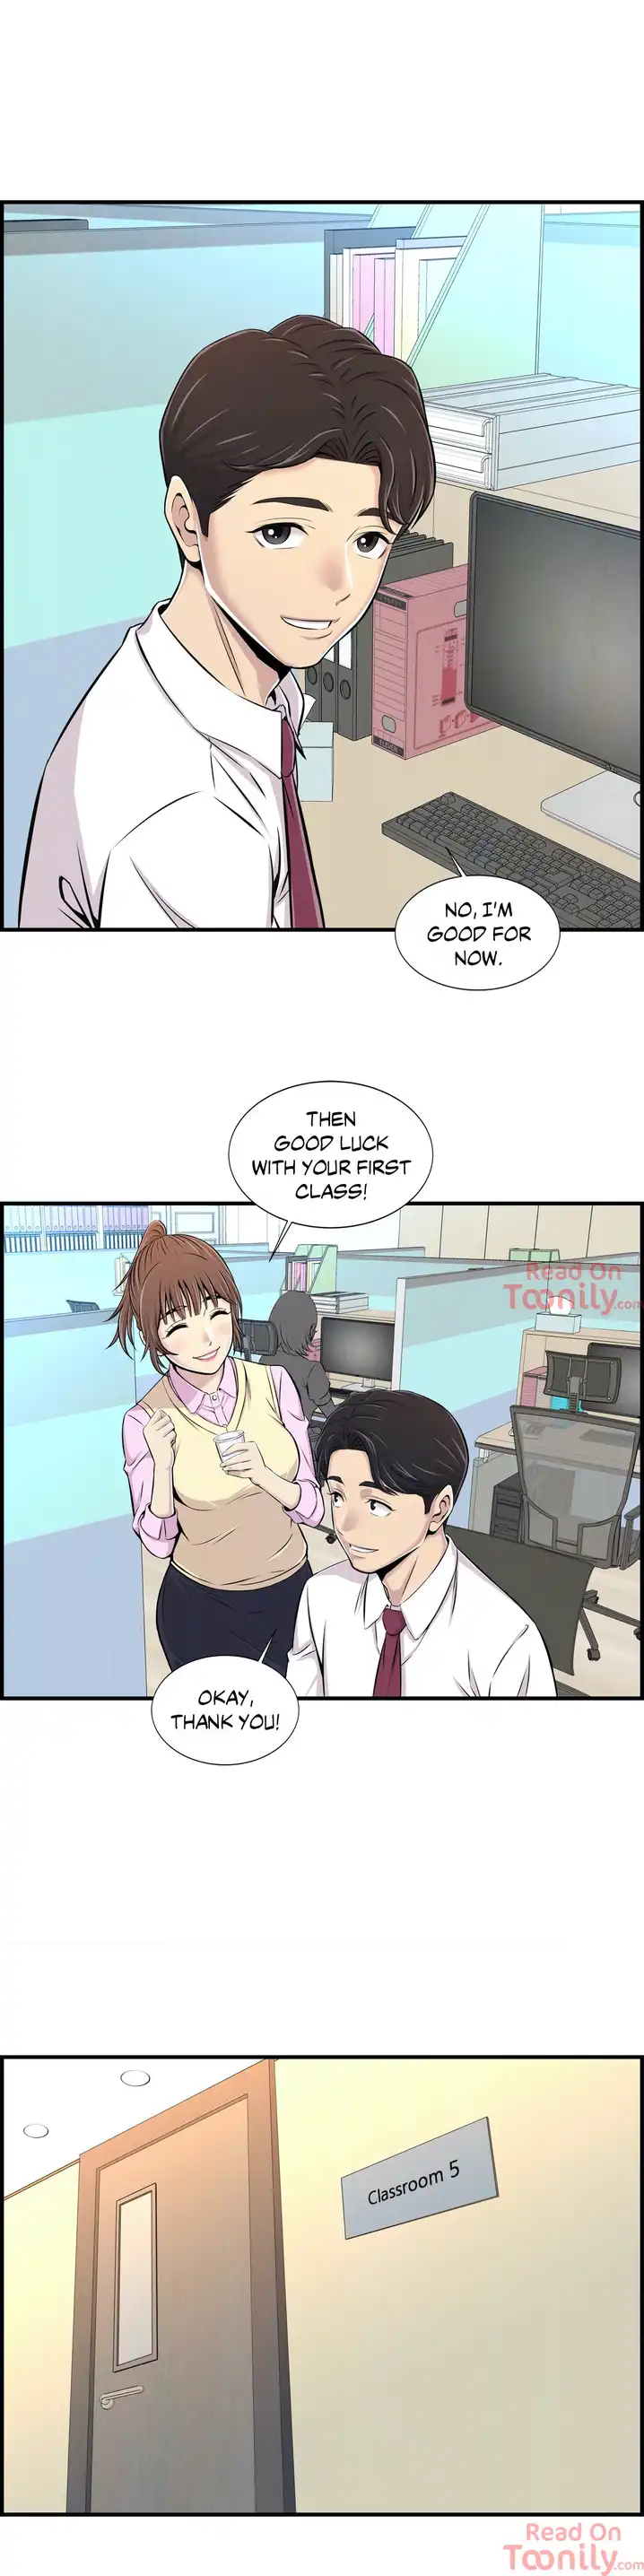 Cram School Scandal - Chapter 1 Page 23